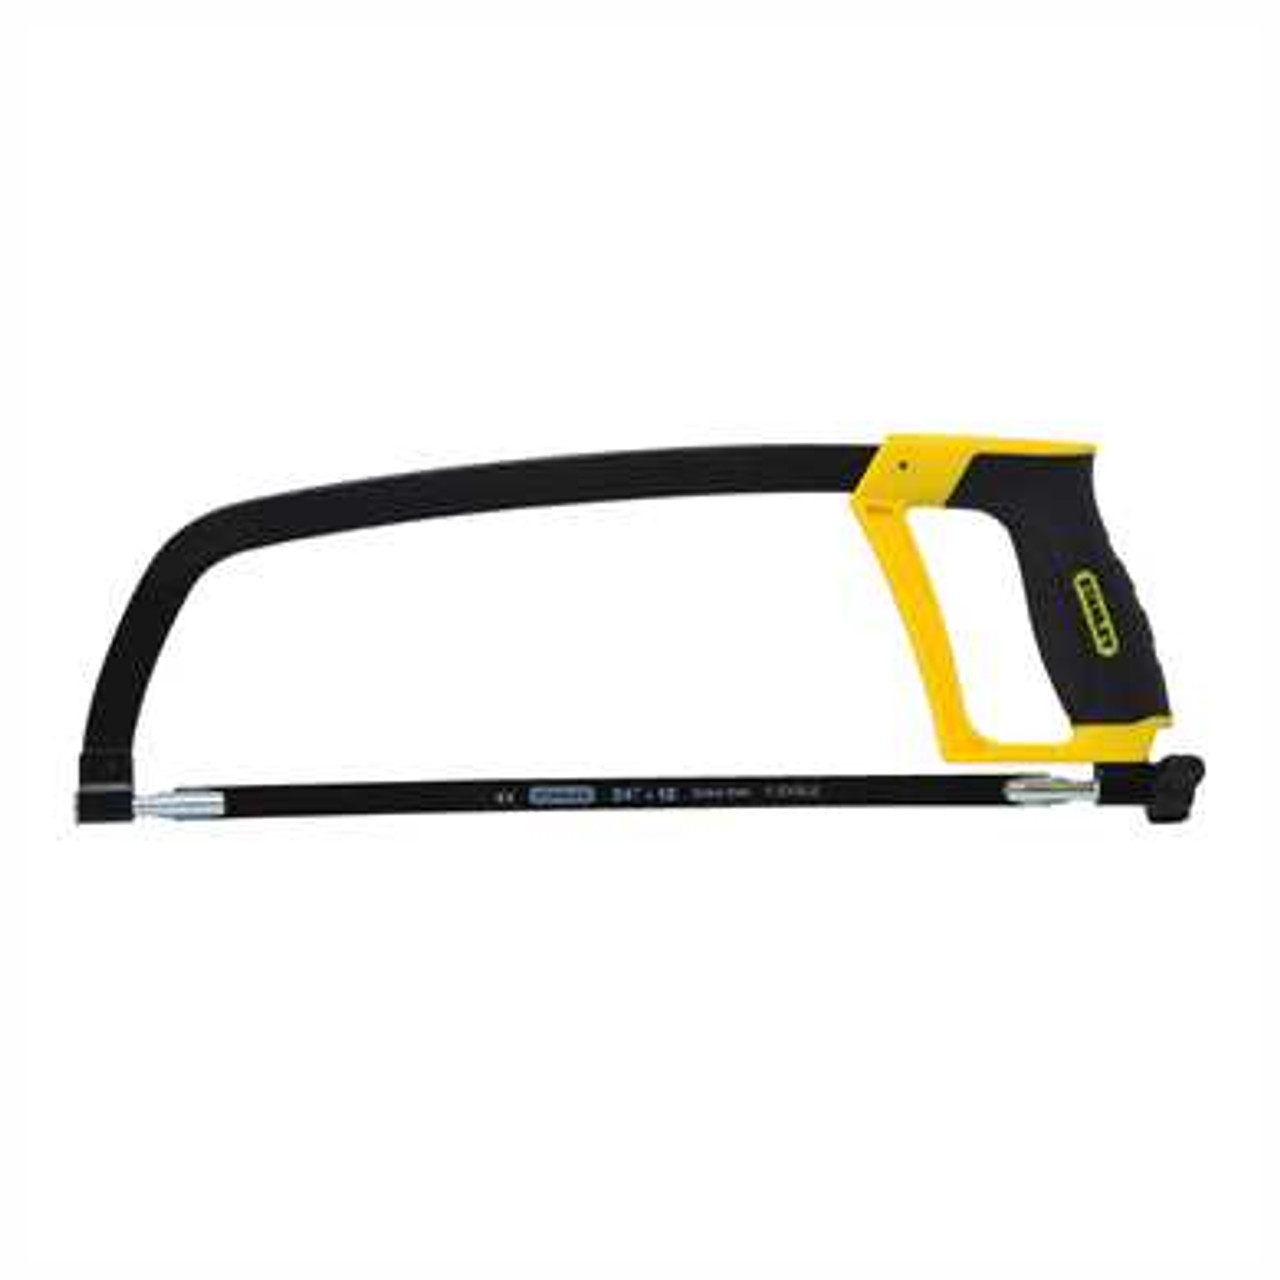 Stanley Tools Rubber Grip Hacksaw STHT20139L